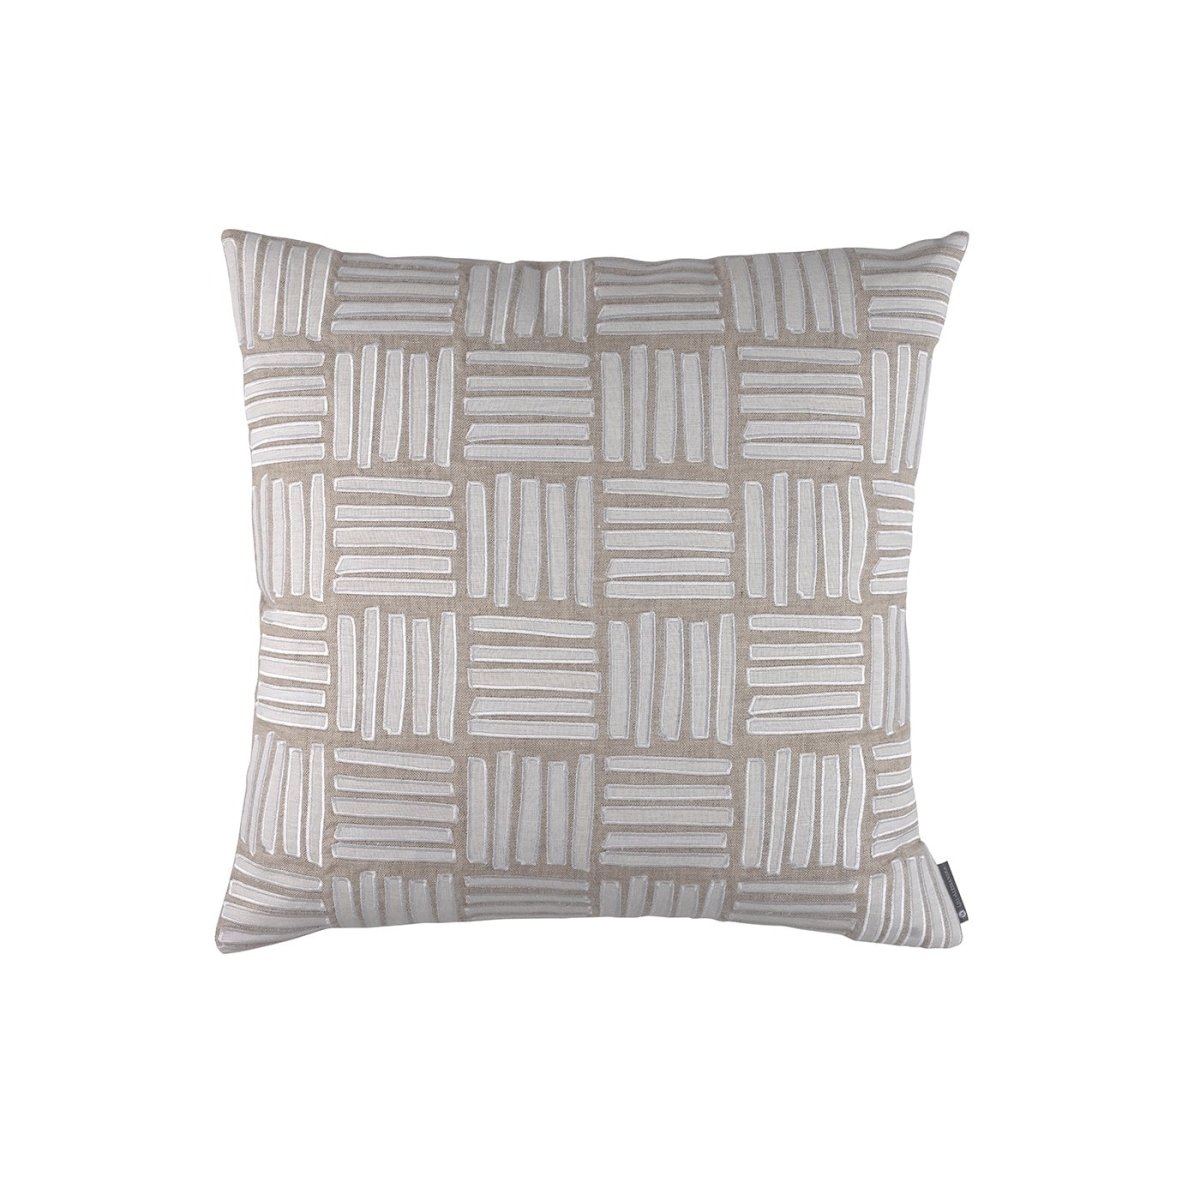 Aspen Natural & White Pillow by Lili Alessandra | Fig Linens